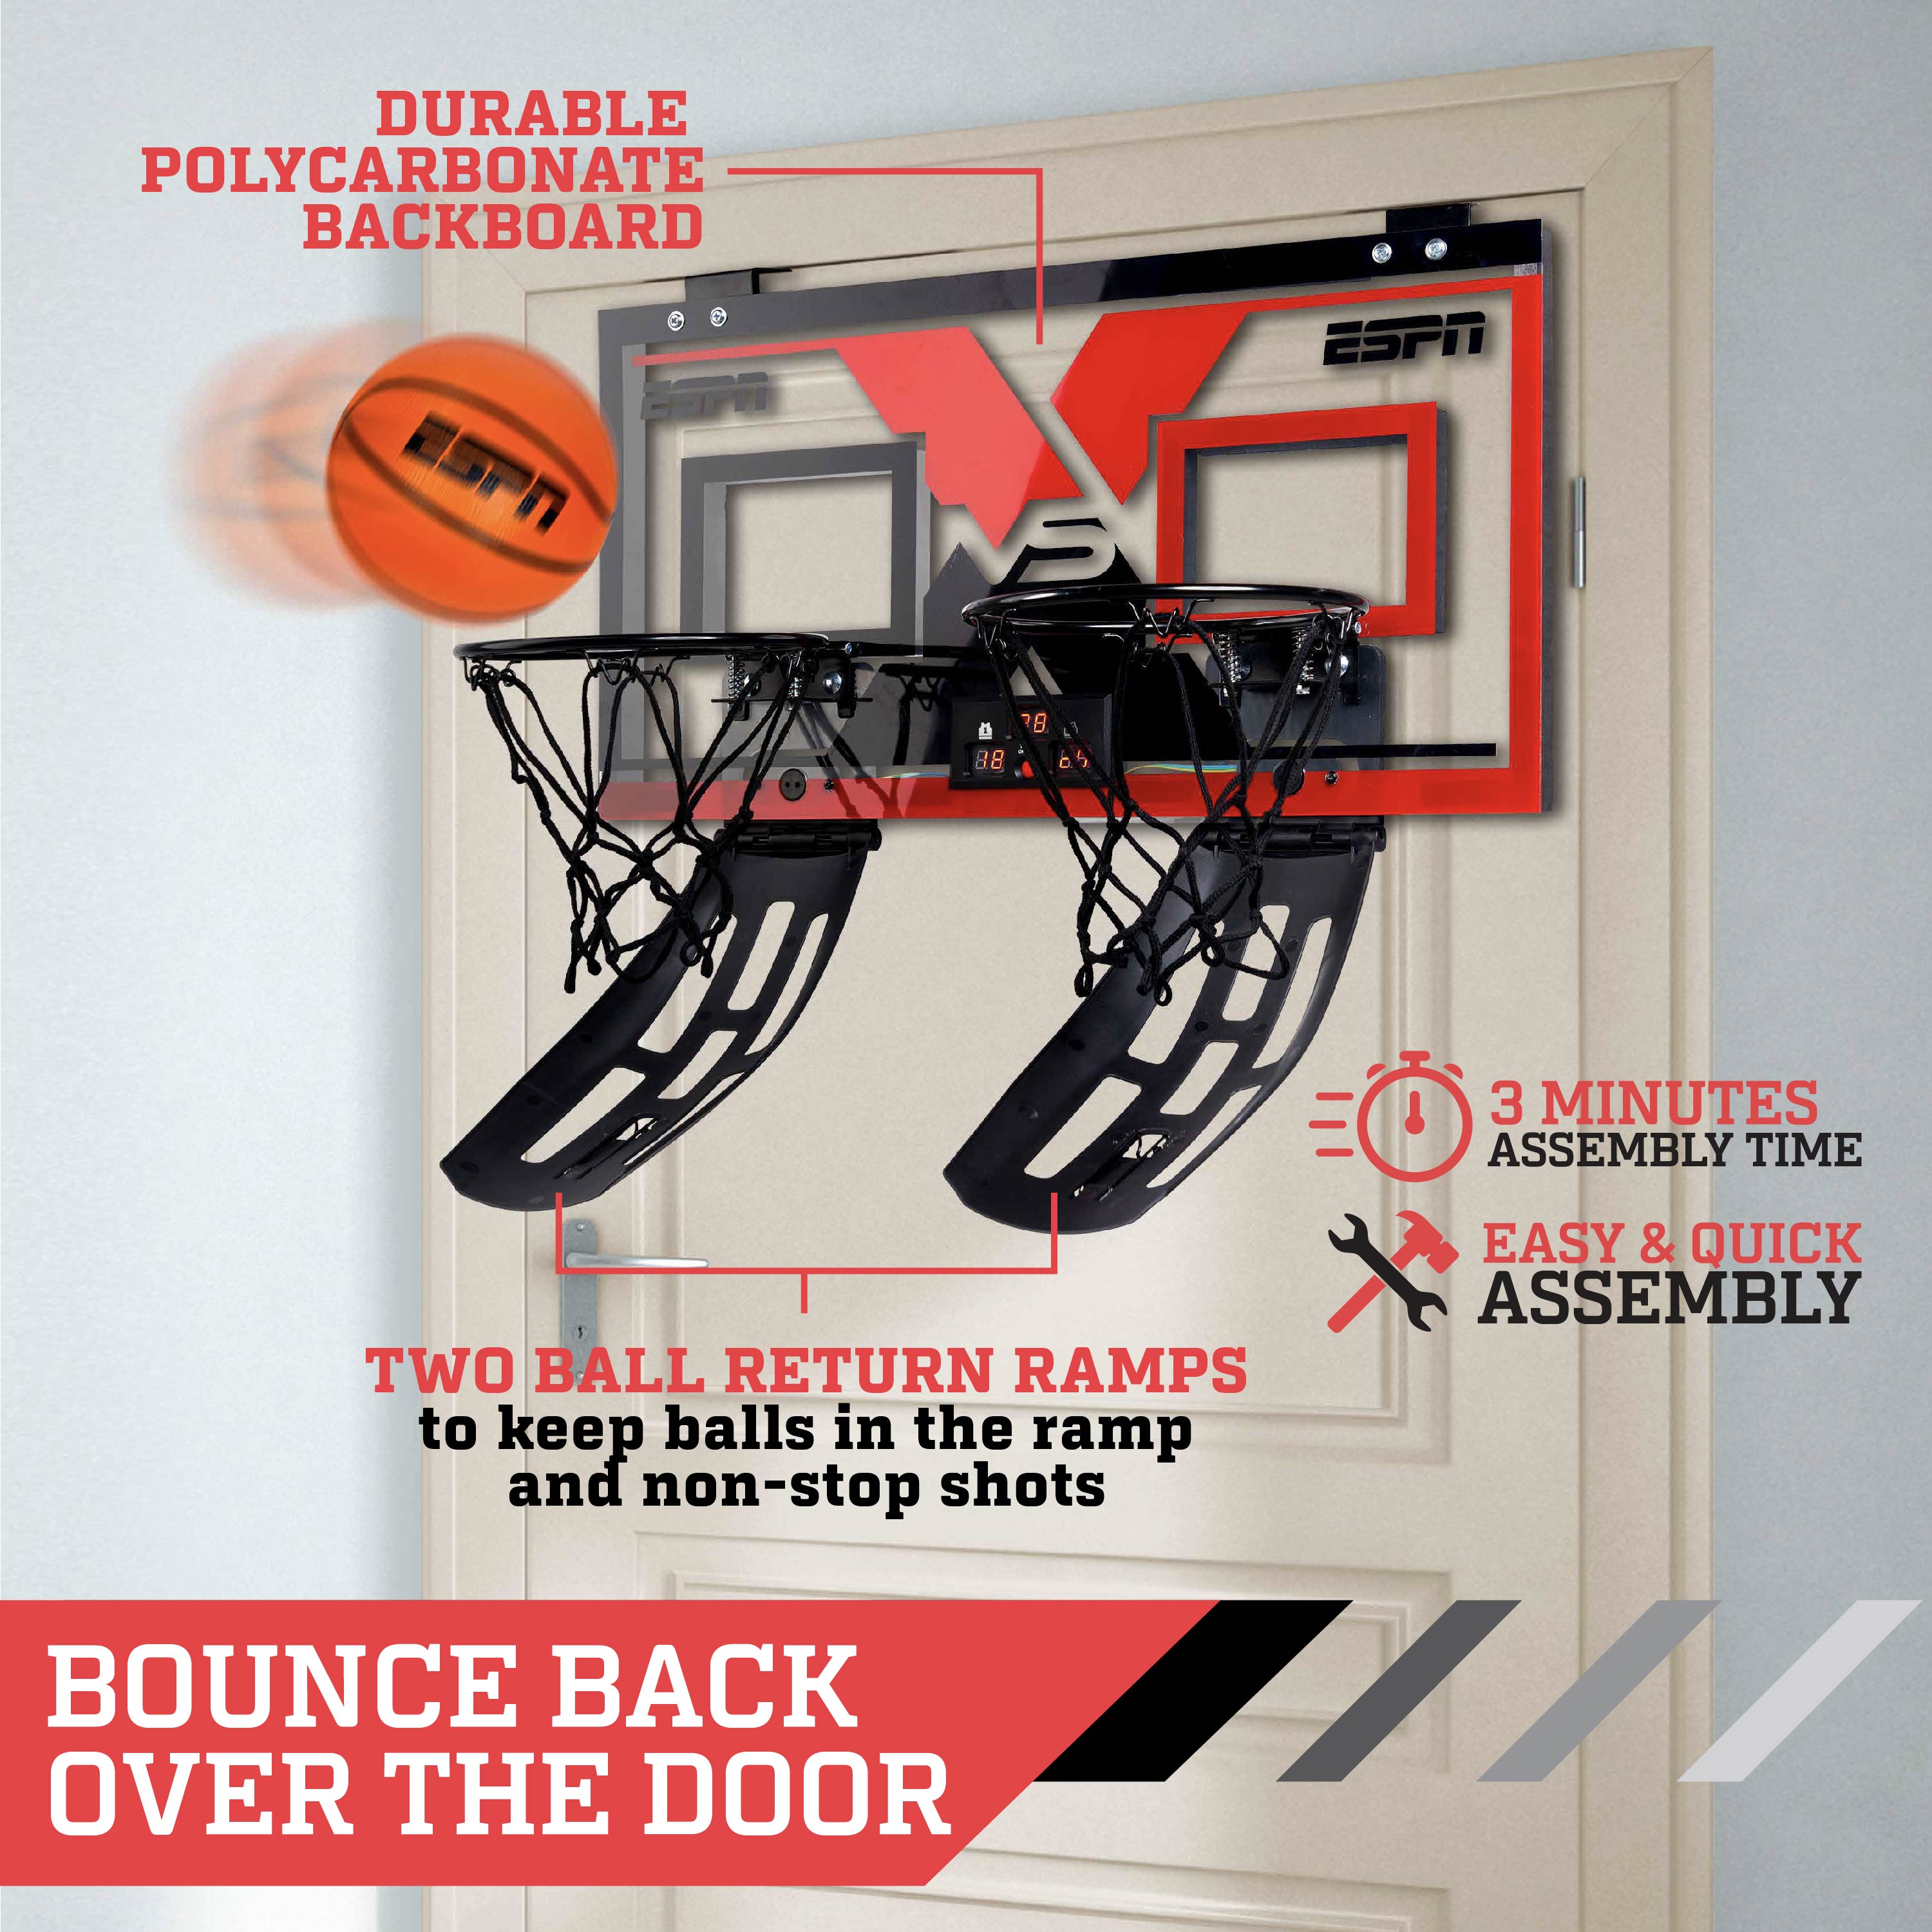 ESPN 2-Player 23 inch Foldable Bounce Back Over the Door Basketball Game - image 3 of 9